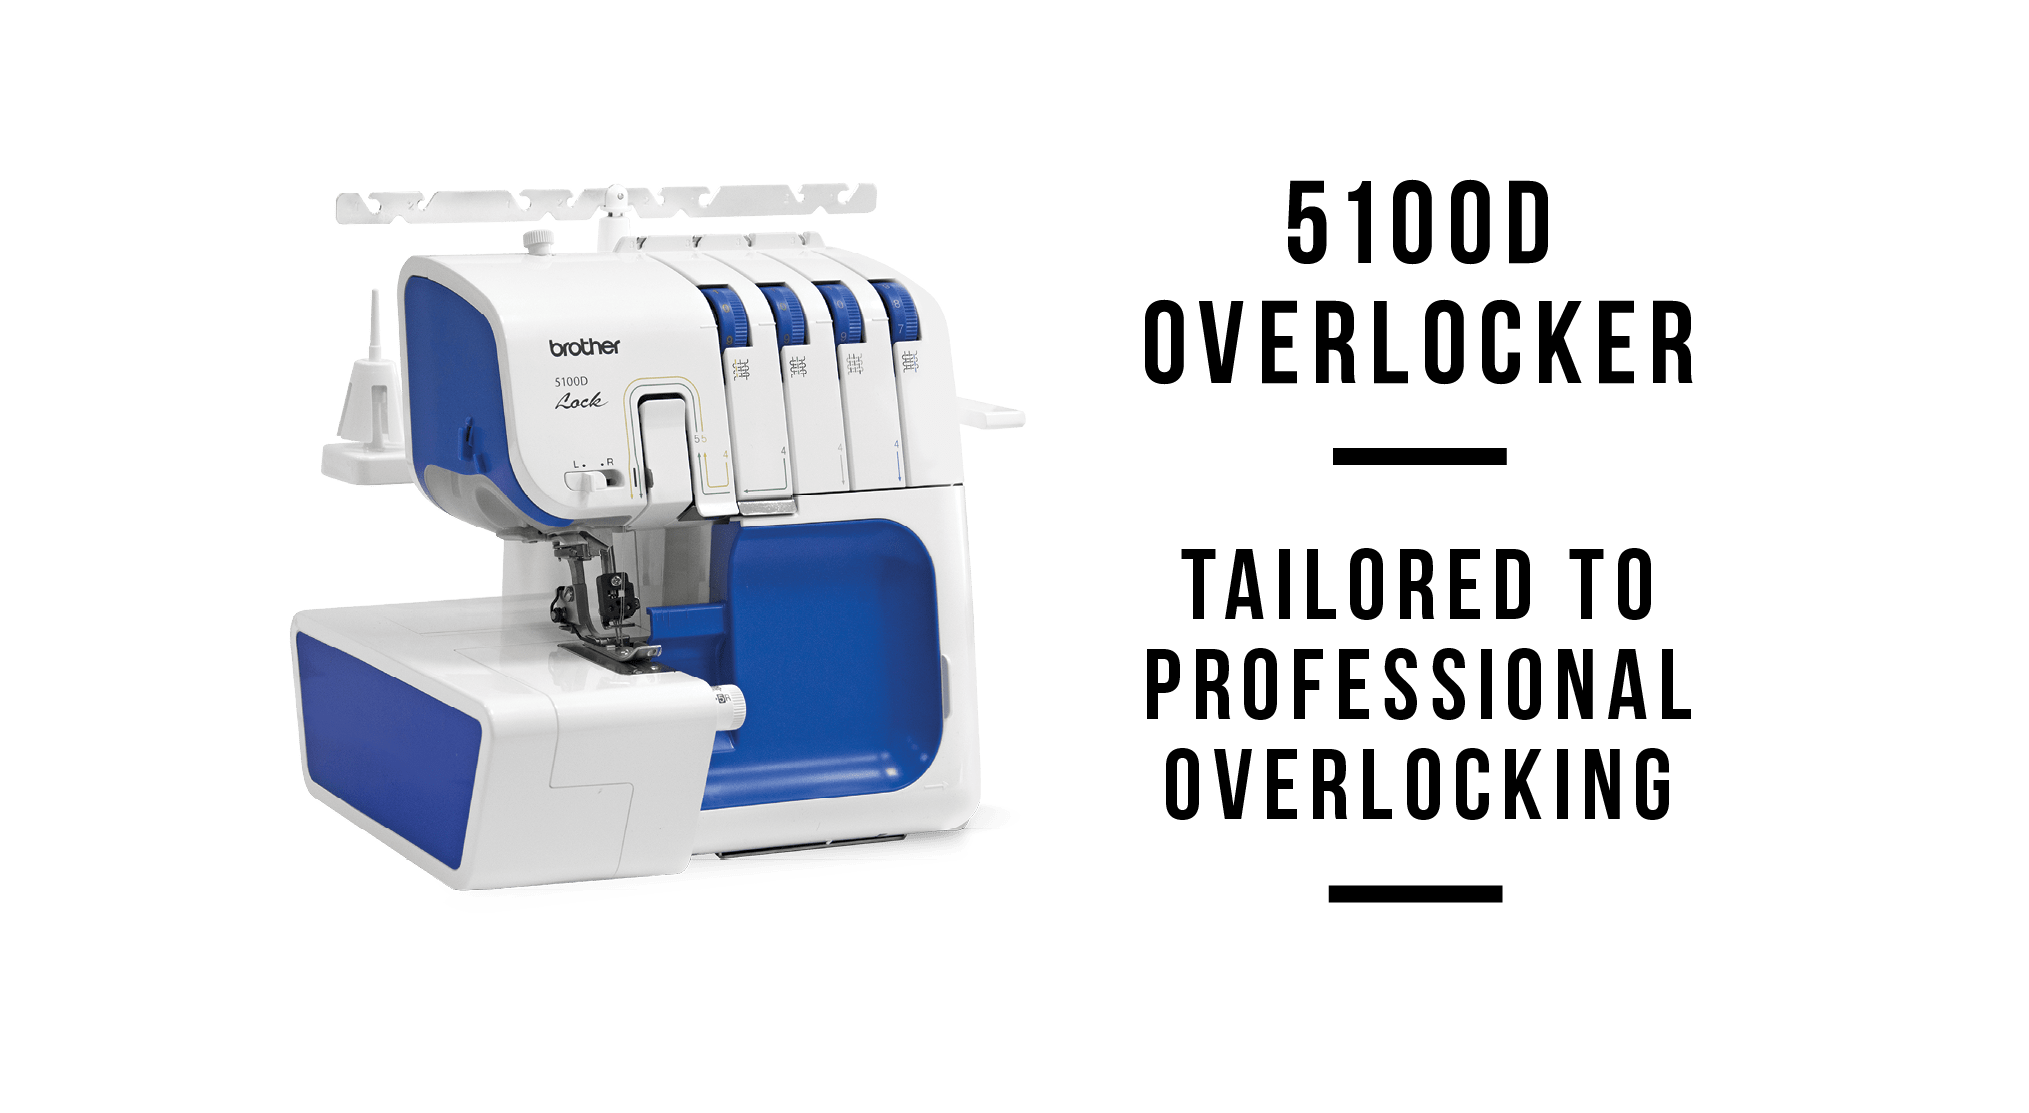 Image of Brother 5100D Overlocker with tagline Tailored to professional overlocking